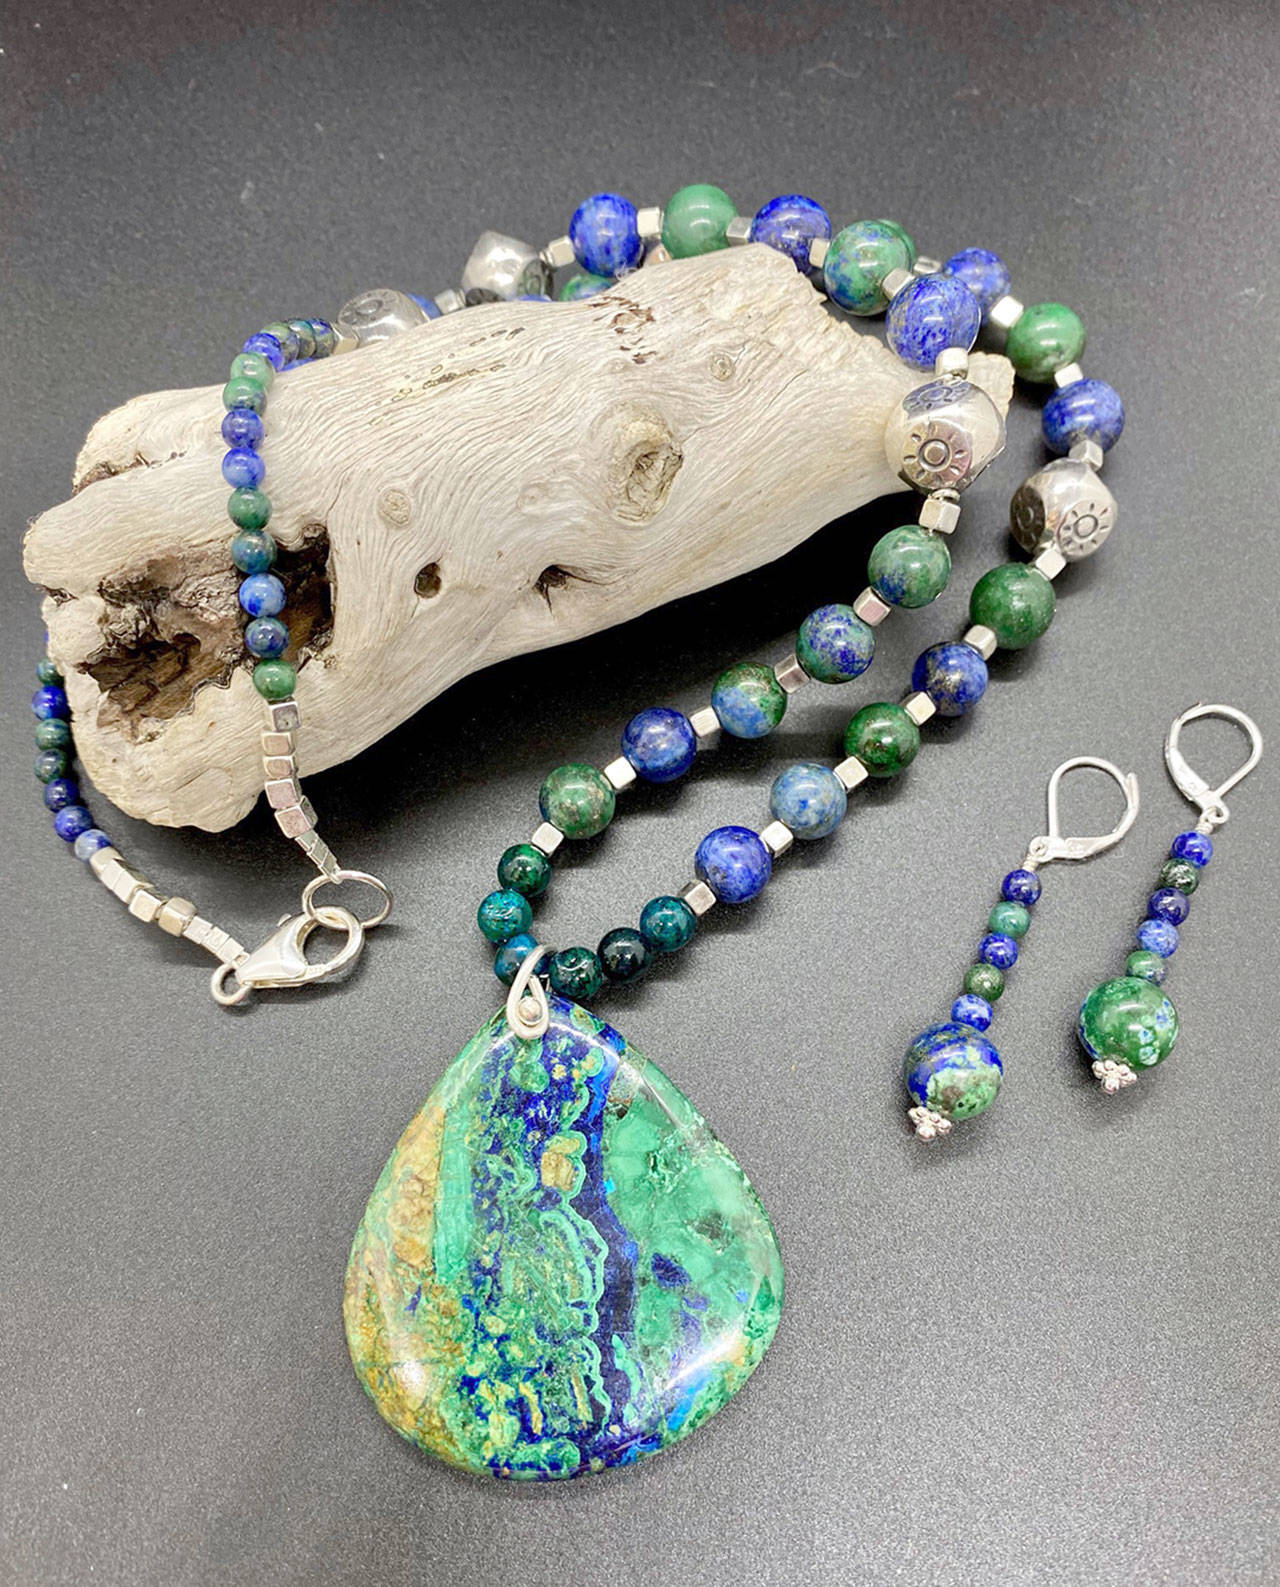 Necklaces by Mara Mauch, Pamela Raine and Linda Henderson will be part of the Port Ludlow Art League’s show of Artists of the Month, which include seven jewelers. (Linda Henderson)